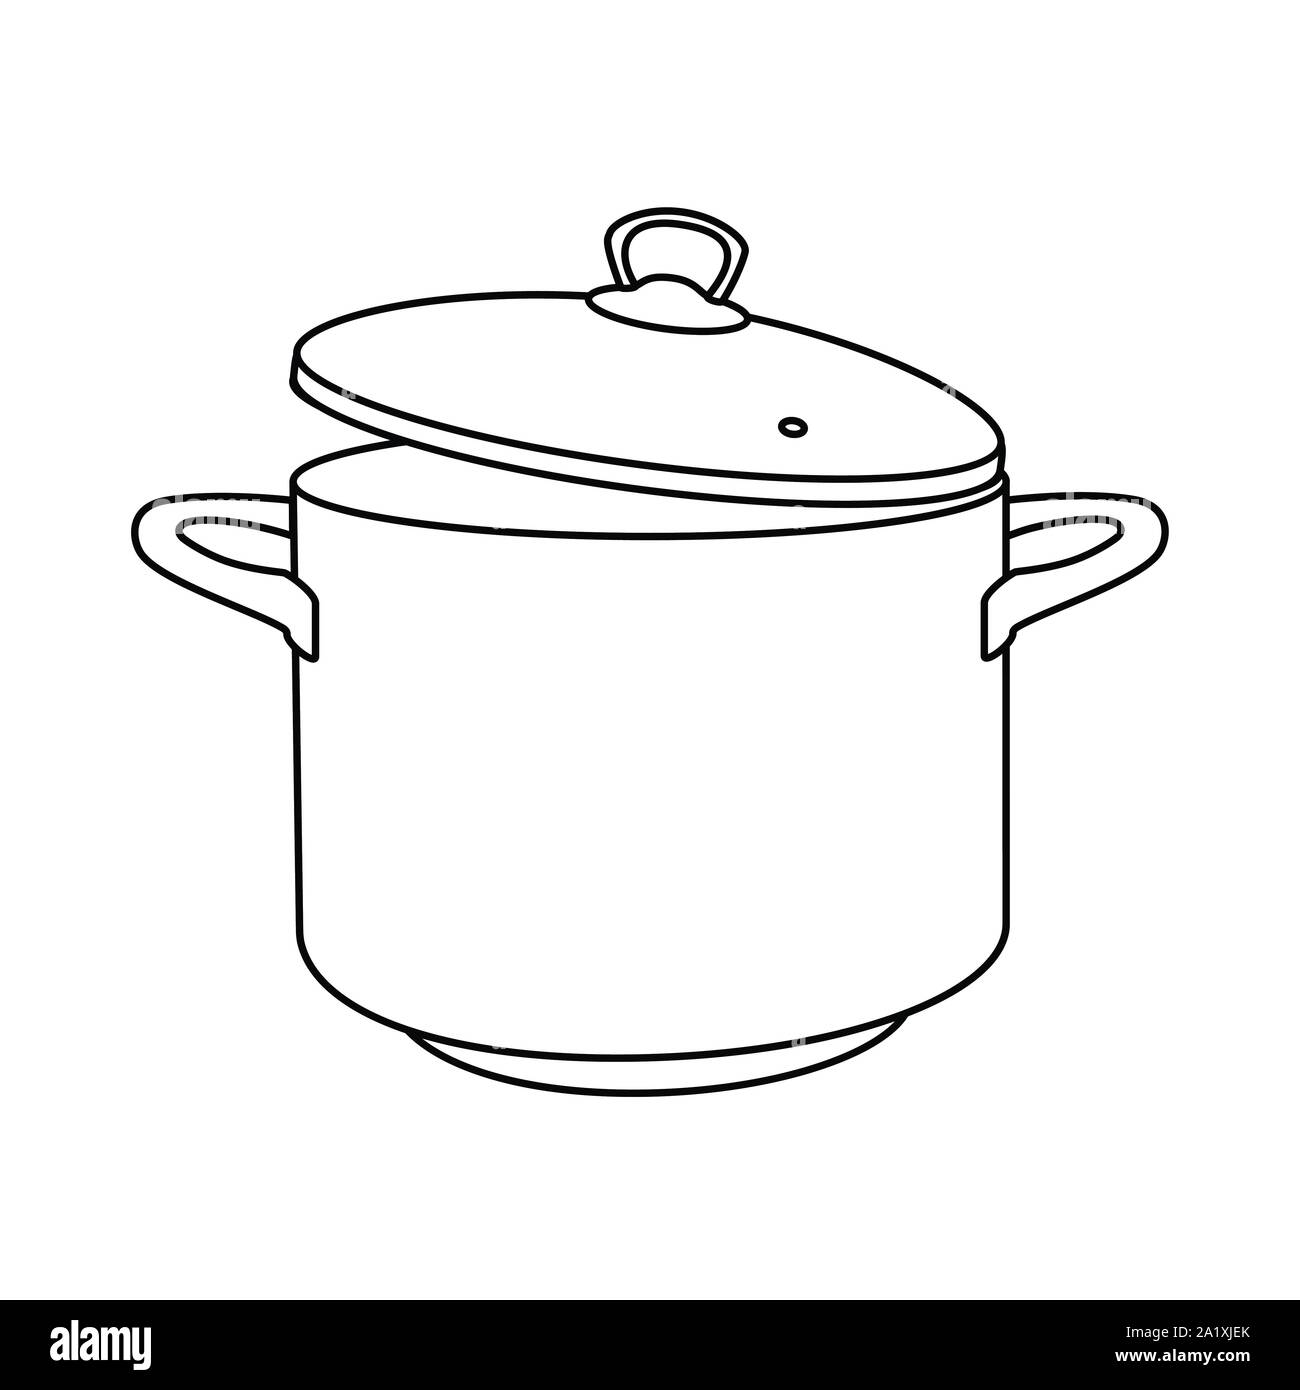 Boiling Water in a Cooking Pot on the Cooker Stock Photo - Image of  kitchenware, chef: 111312522